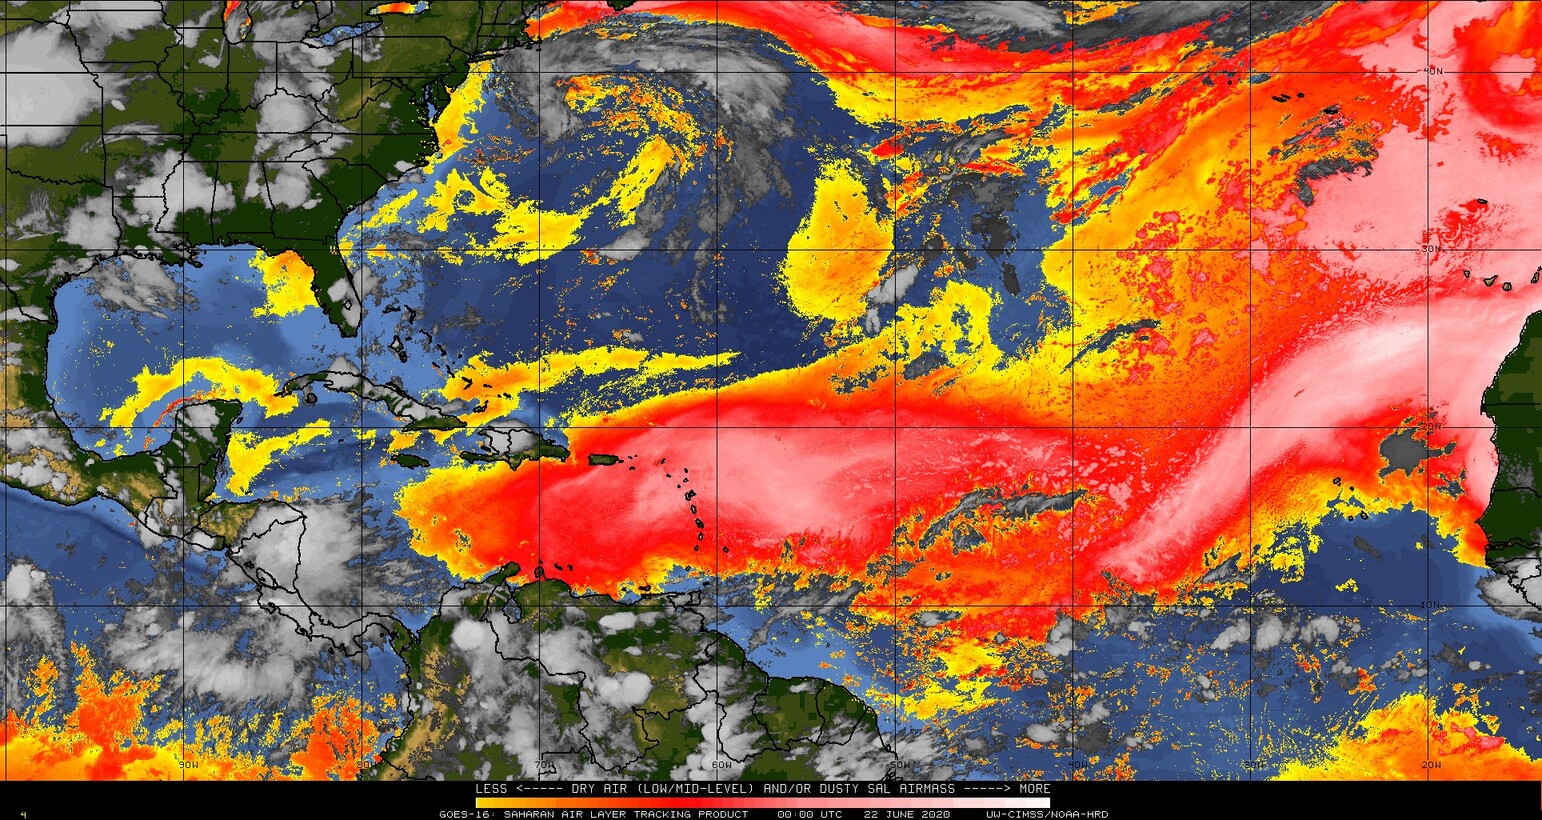 A major dust storm is in progress for Puerto Rico and the surrounding islands in the Greater and Lesser Antilles.   Concentrations of up to 600 ug/m3 